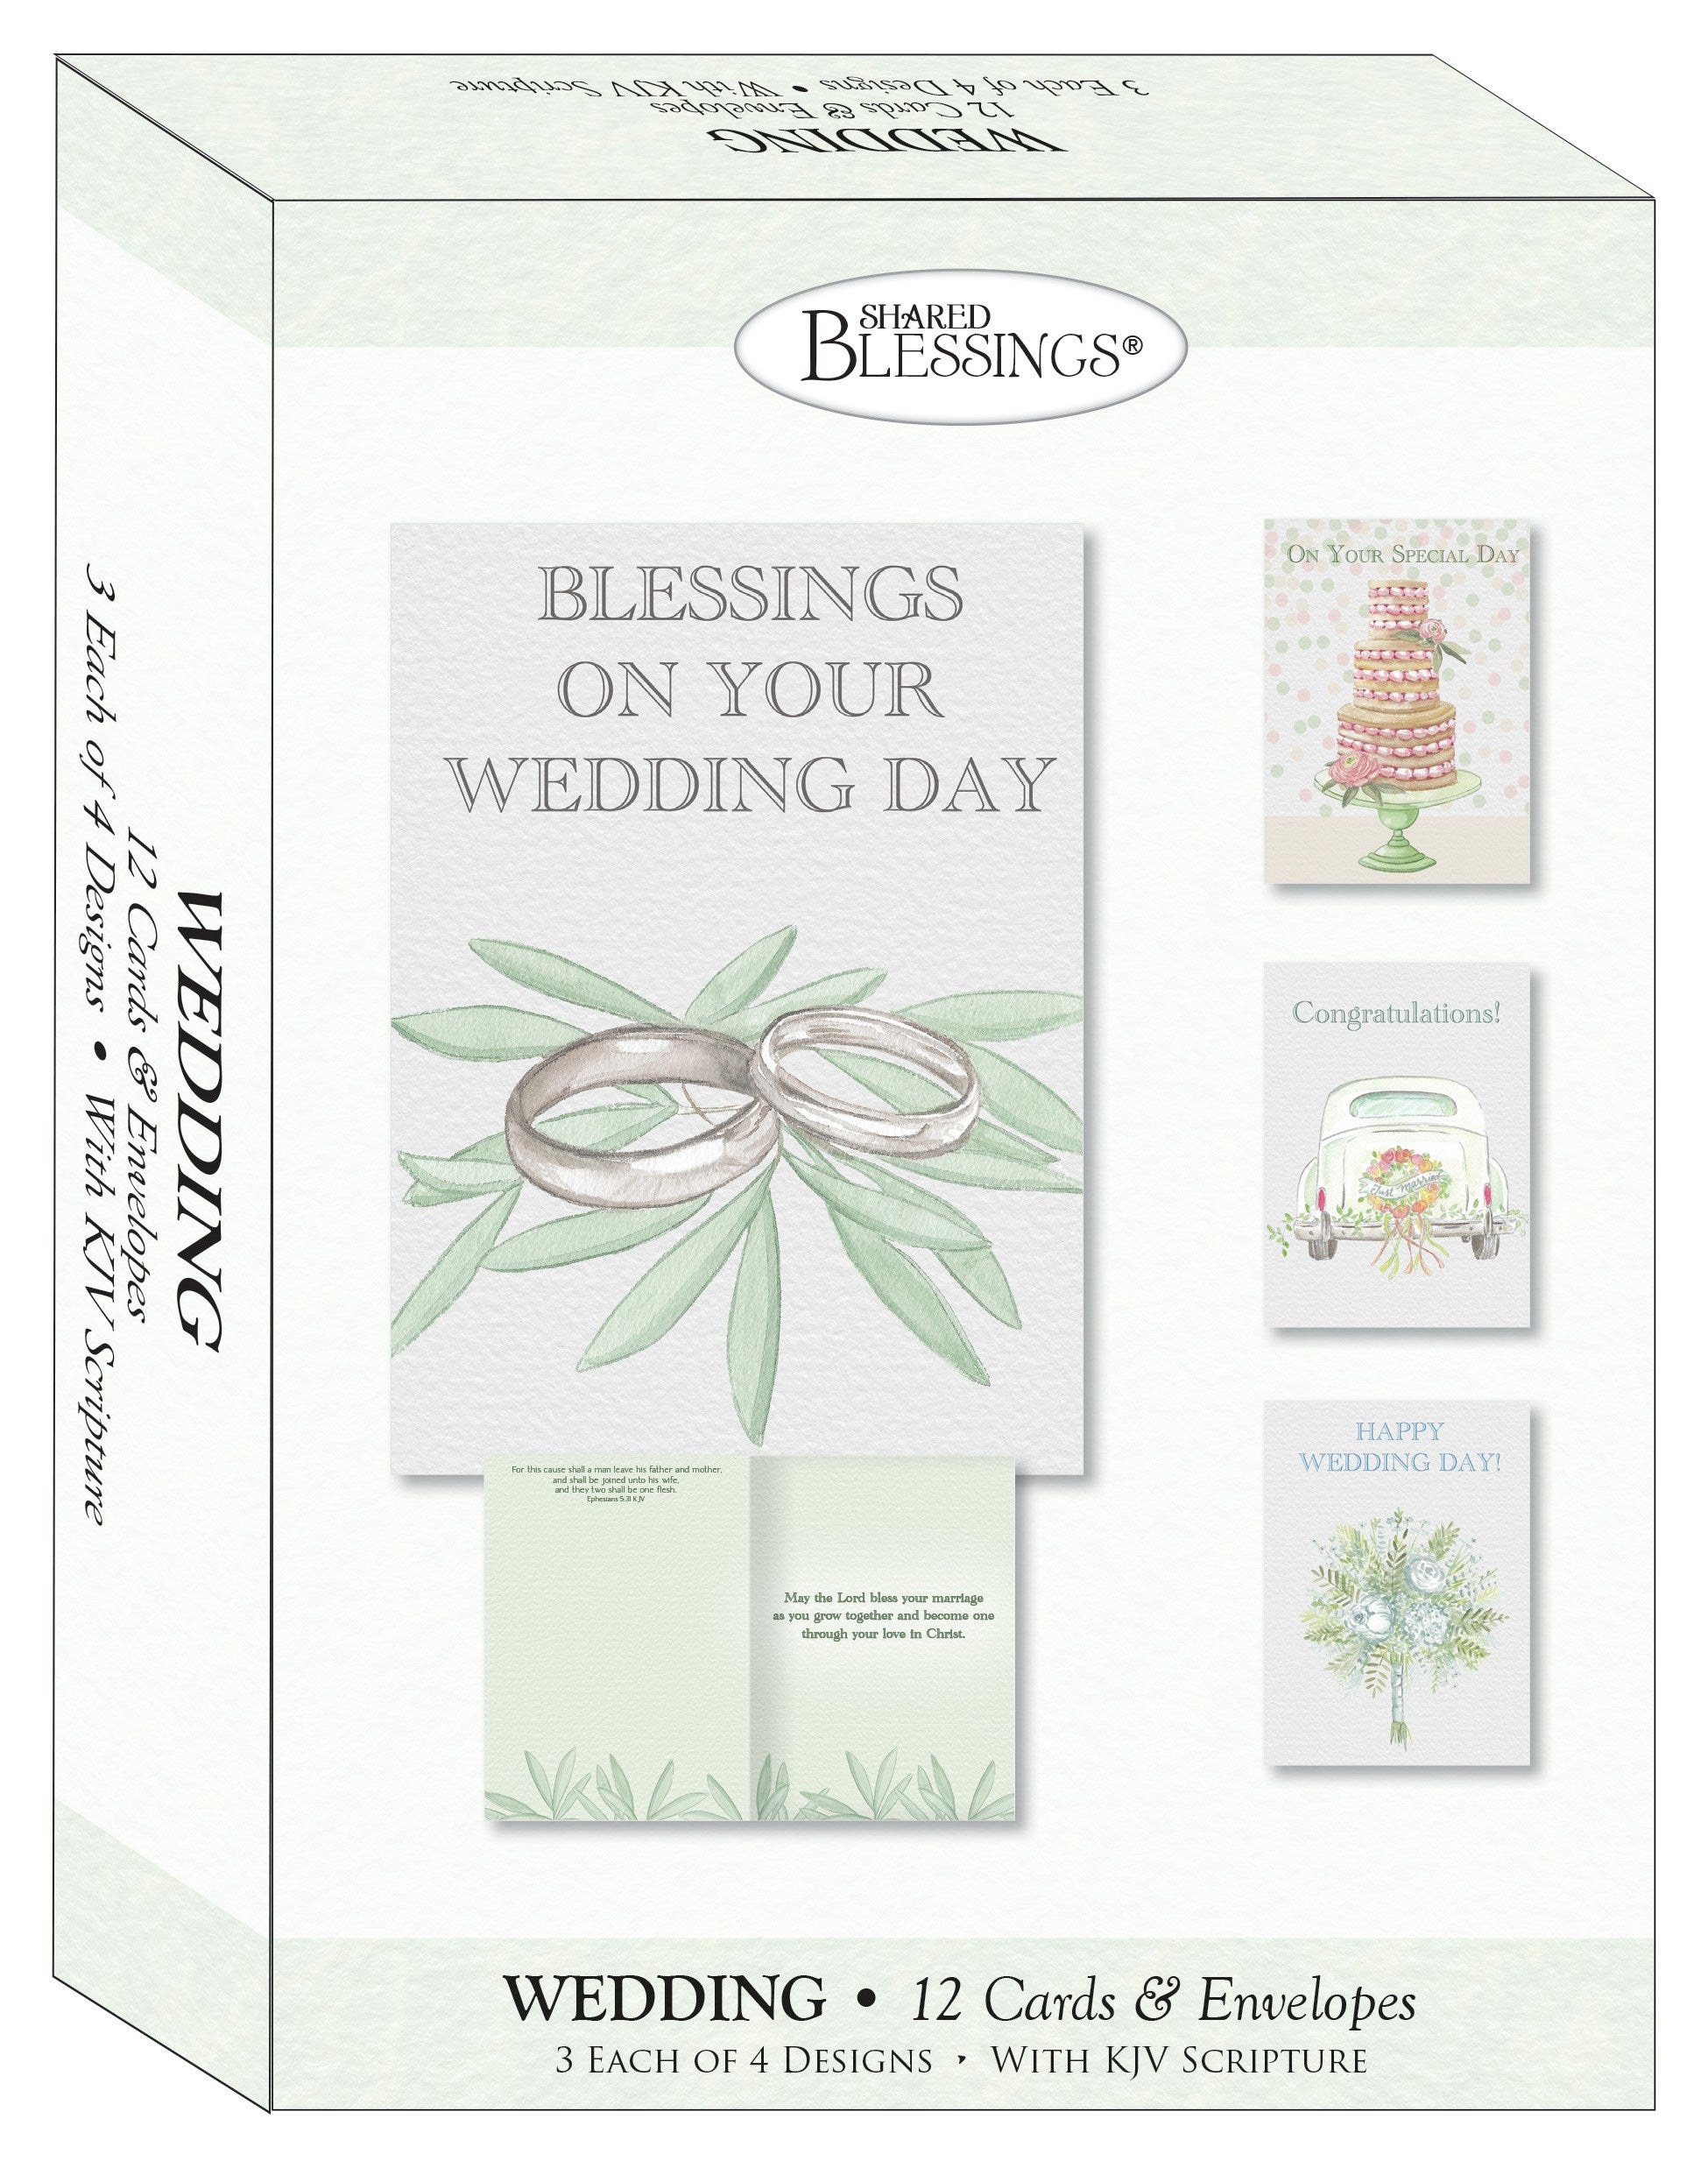 Seed of Abraham Christian Bookstore - (In)Courage - Card-Boxed-Shared Blessings-Wedding Celebration (Box Of 12)